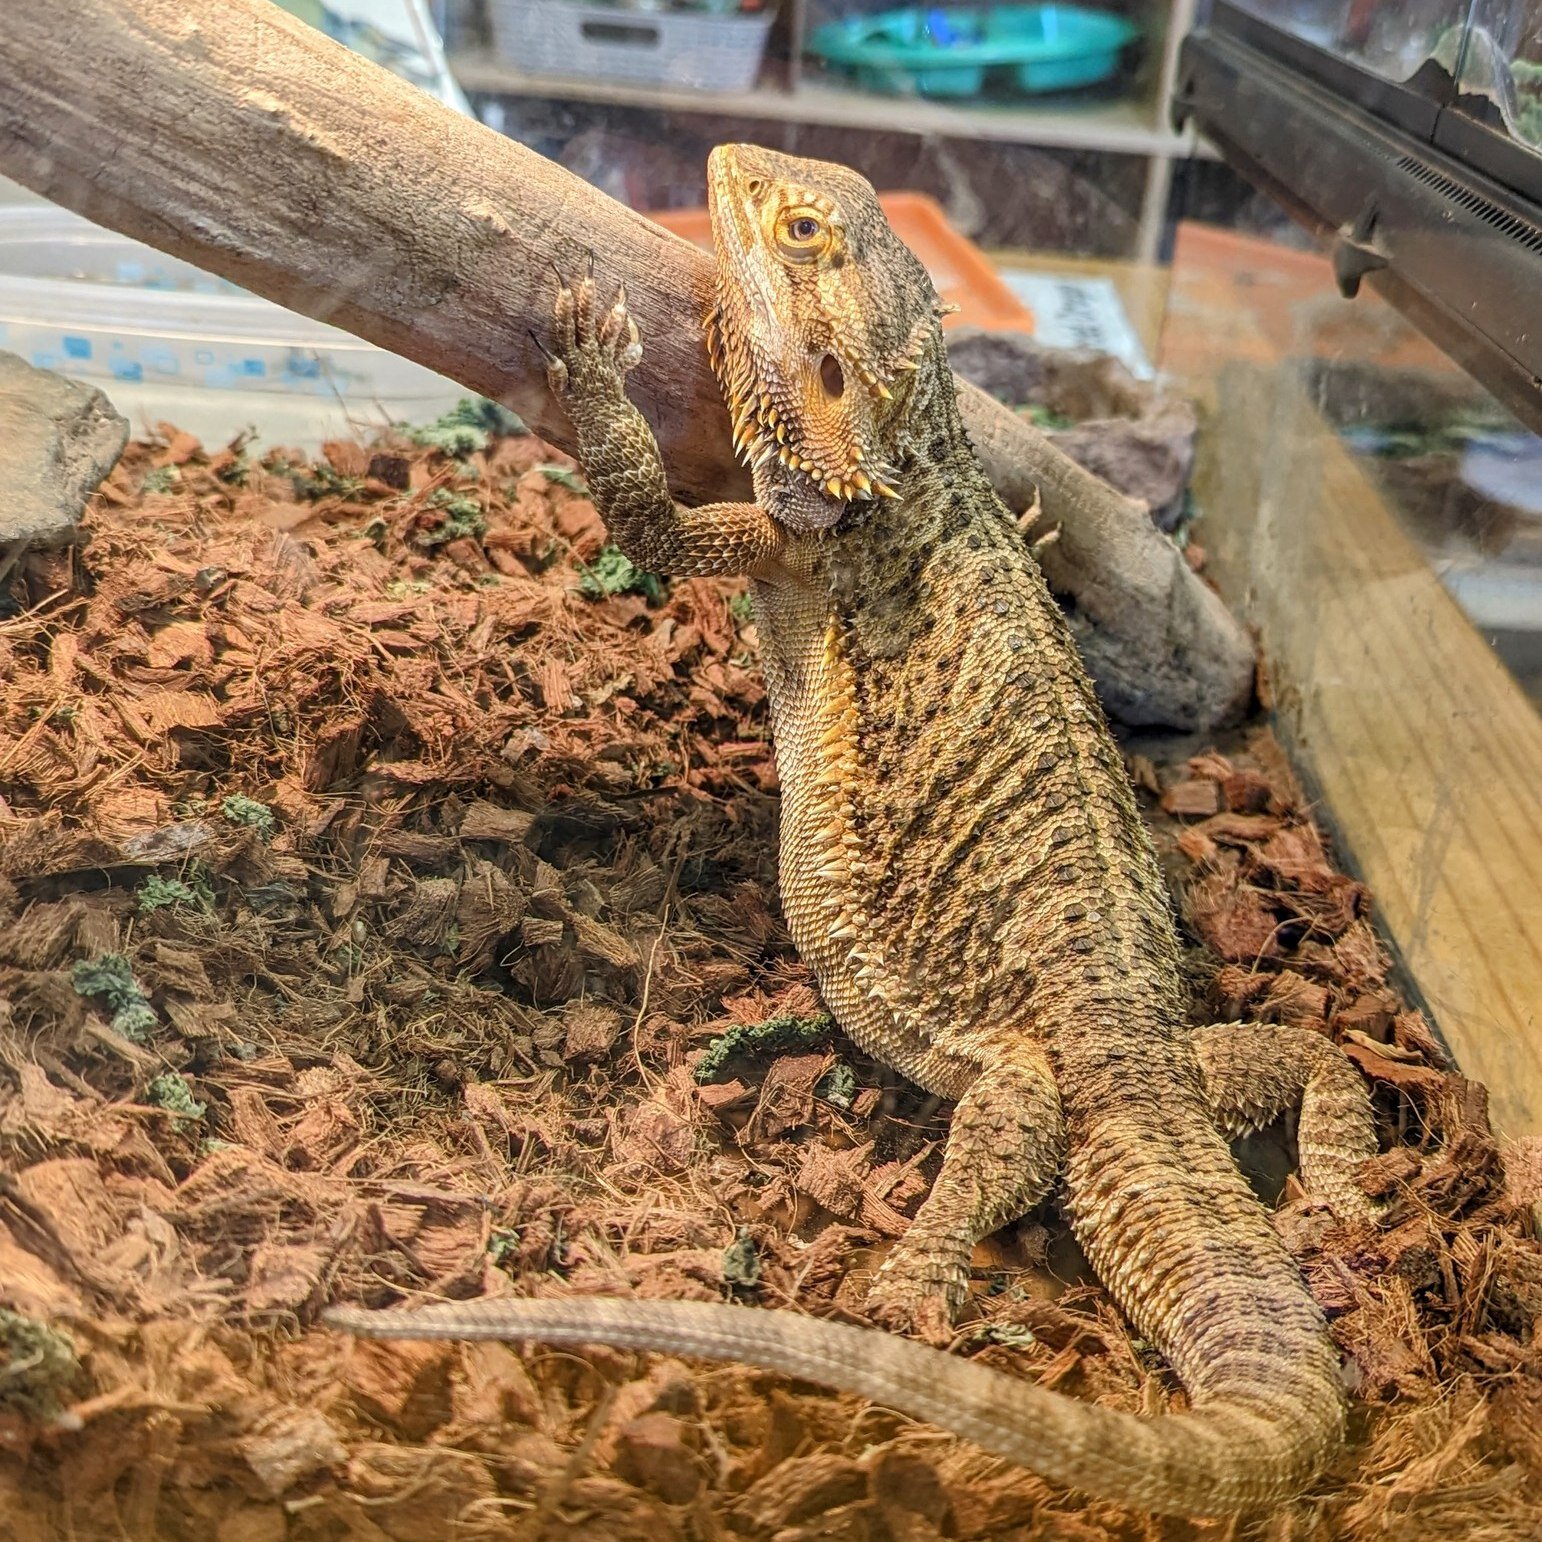 Did you know our class has some awesome four-legged friends? Meet our bearded dragon, wood turtle, bullfrog, and dwarf frog! 🦎🐢🐸 Our class pets are the perfect teachers for responsibility. From feeding to watering and making sure they get some exe